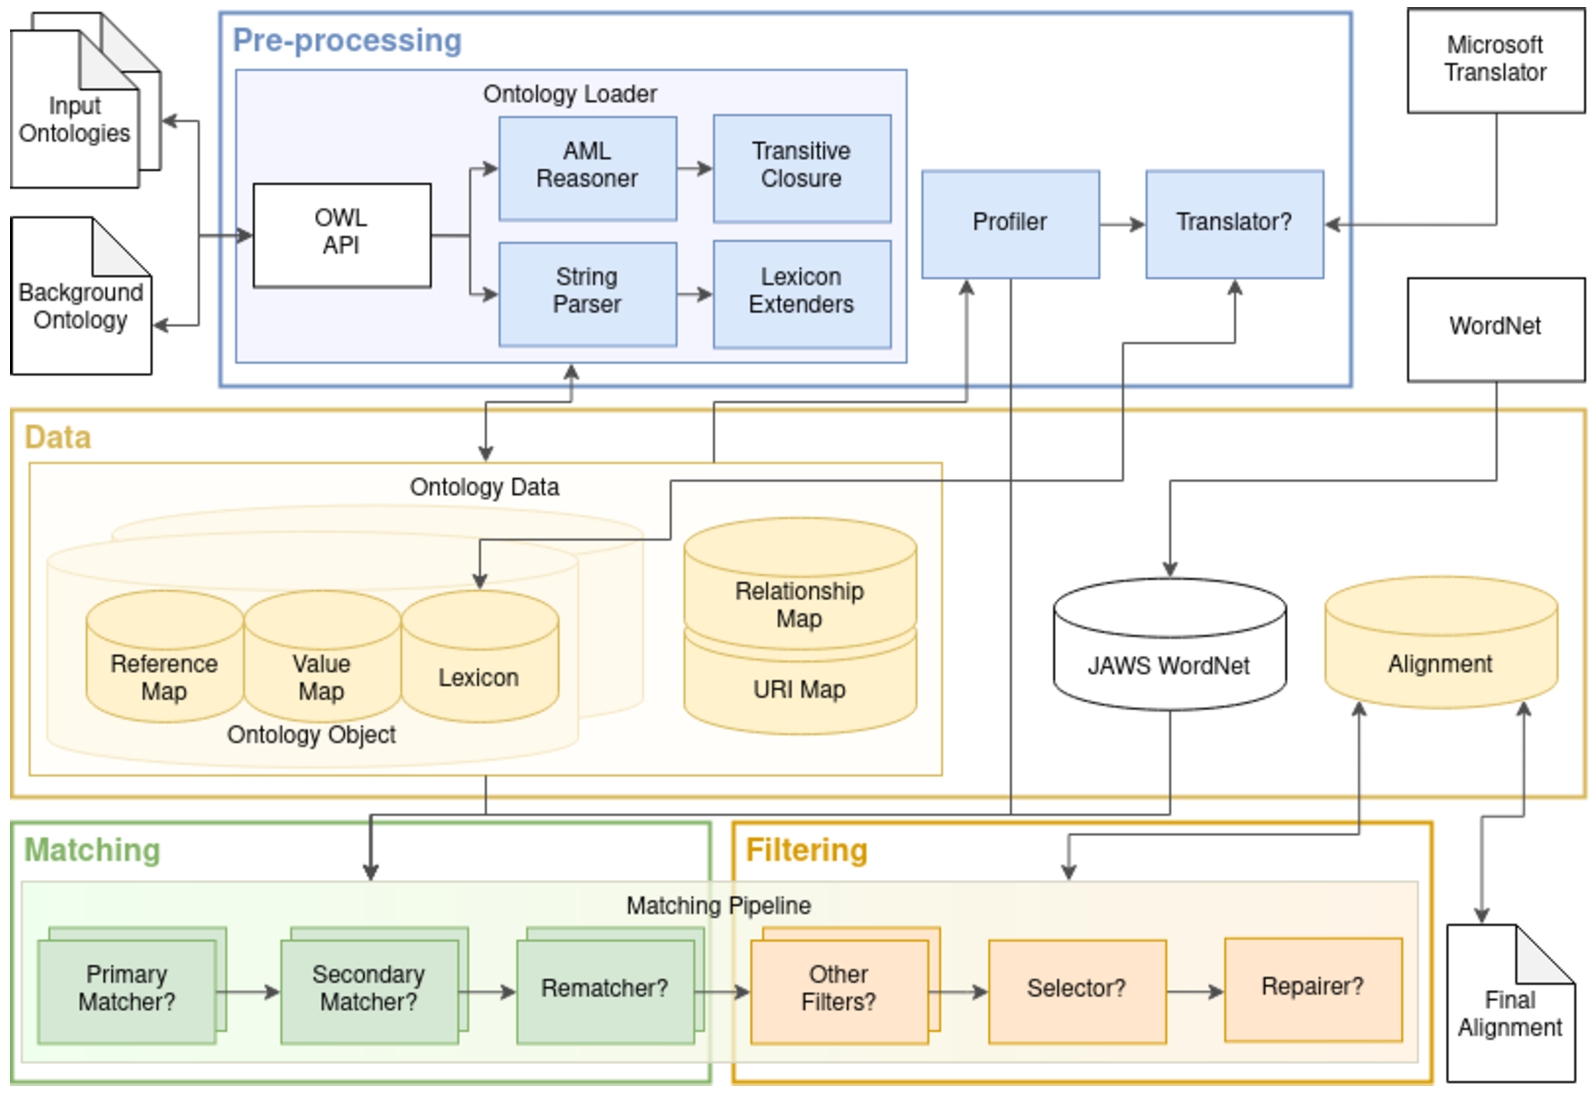 AML architecture. The pre-processing module handles the loading of ontologies and extracting all the relevant information to populate AML’s data structures. It also handles the profiling of the matching task, which configures which matching and filtering algorithms will compose AML’s matching pipeline, as well as their settings. Question marks indicate conditional steps.